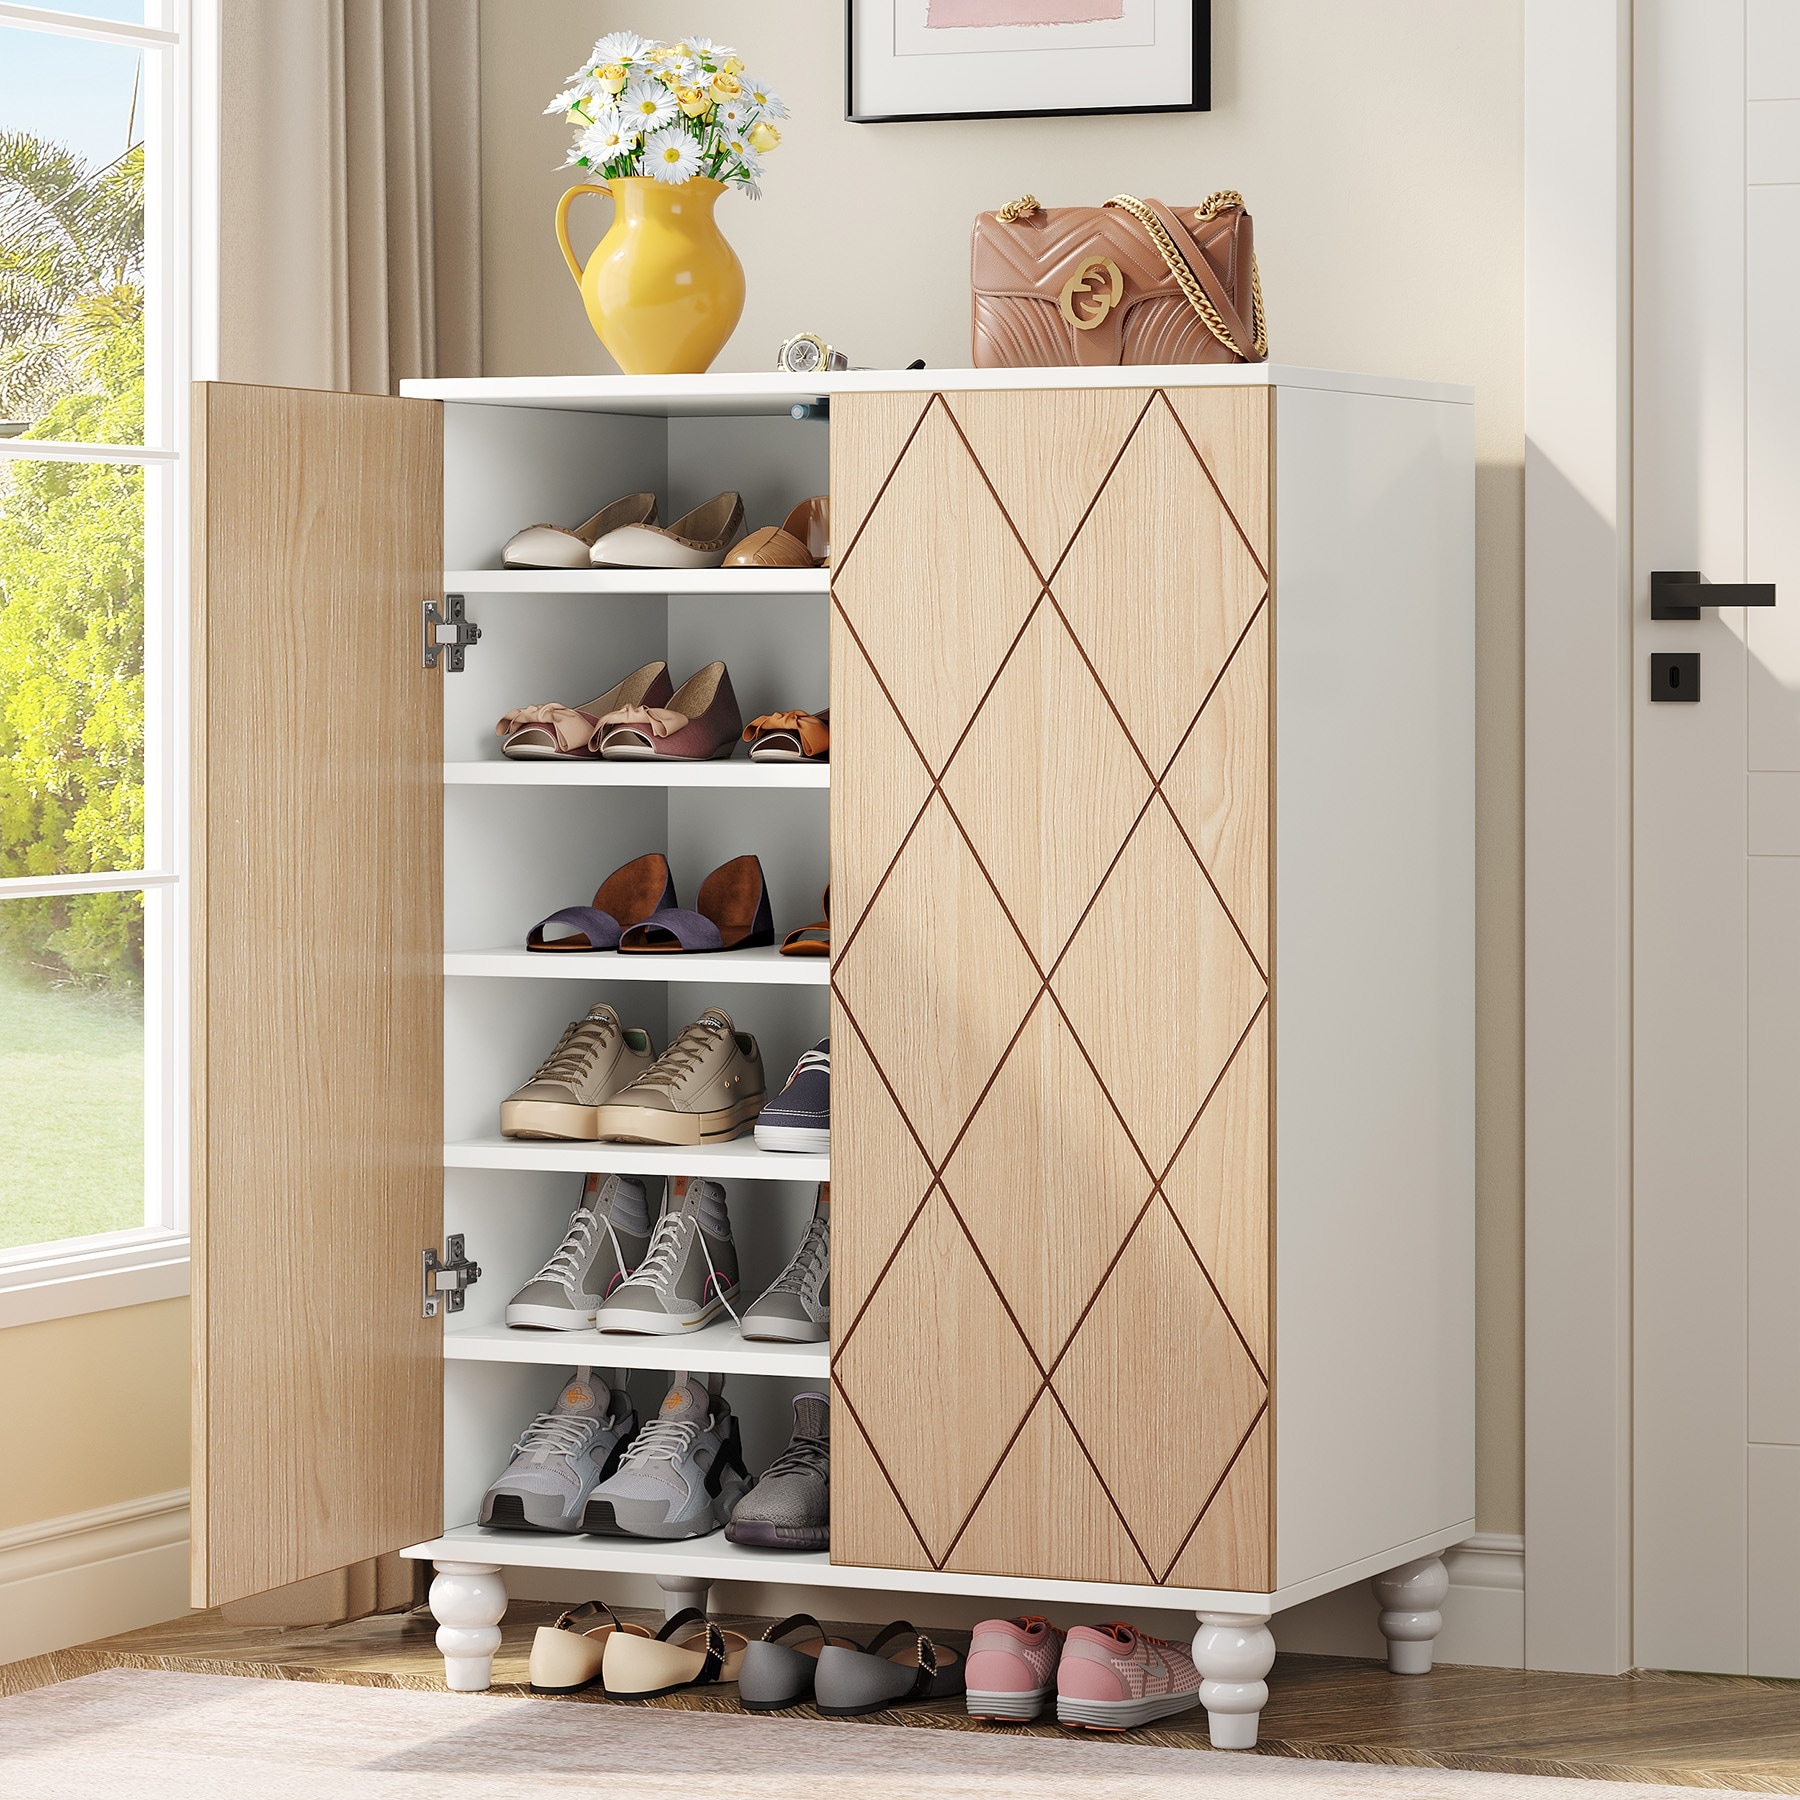 https://ak1.ostkcdn.com/images/products/is/images/direct/b4951a89ddd6709e09bf14d68f9cd3310ab69a07/20-Pairs-Shoe-Storage-Cabinet-with-Doors%2C-Wooden-Shoes-Cabinets-with-Adjustable-Shelves.jpg